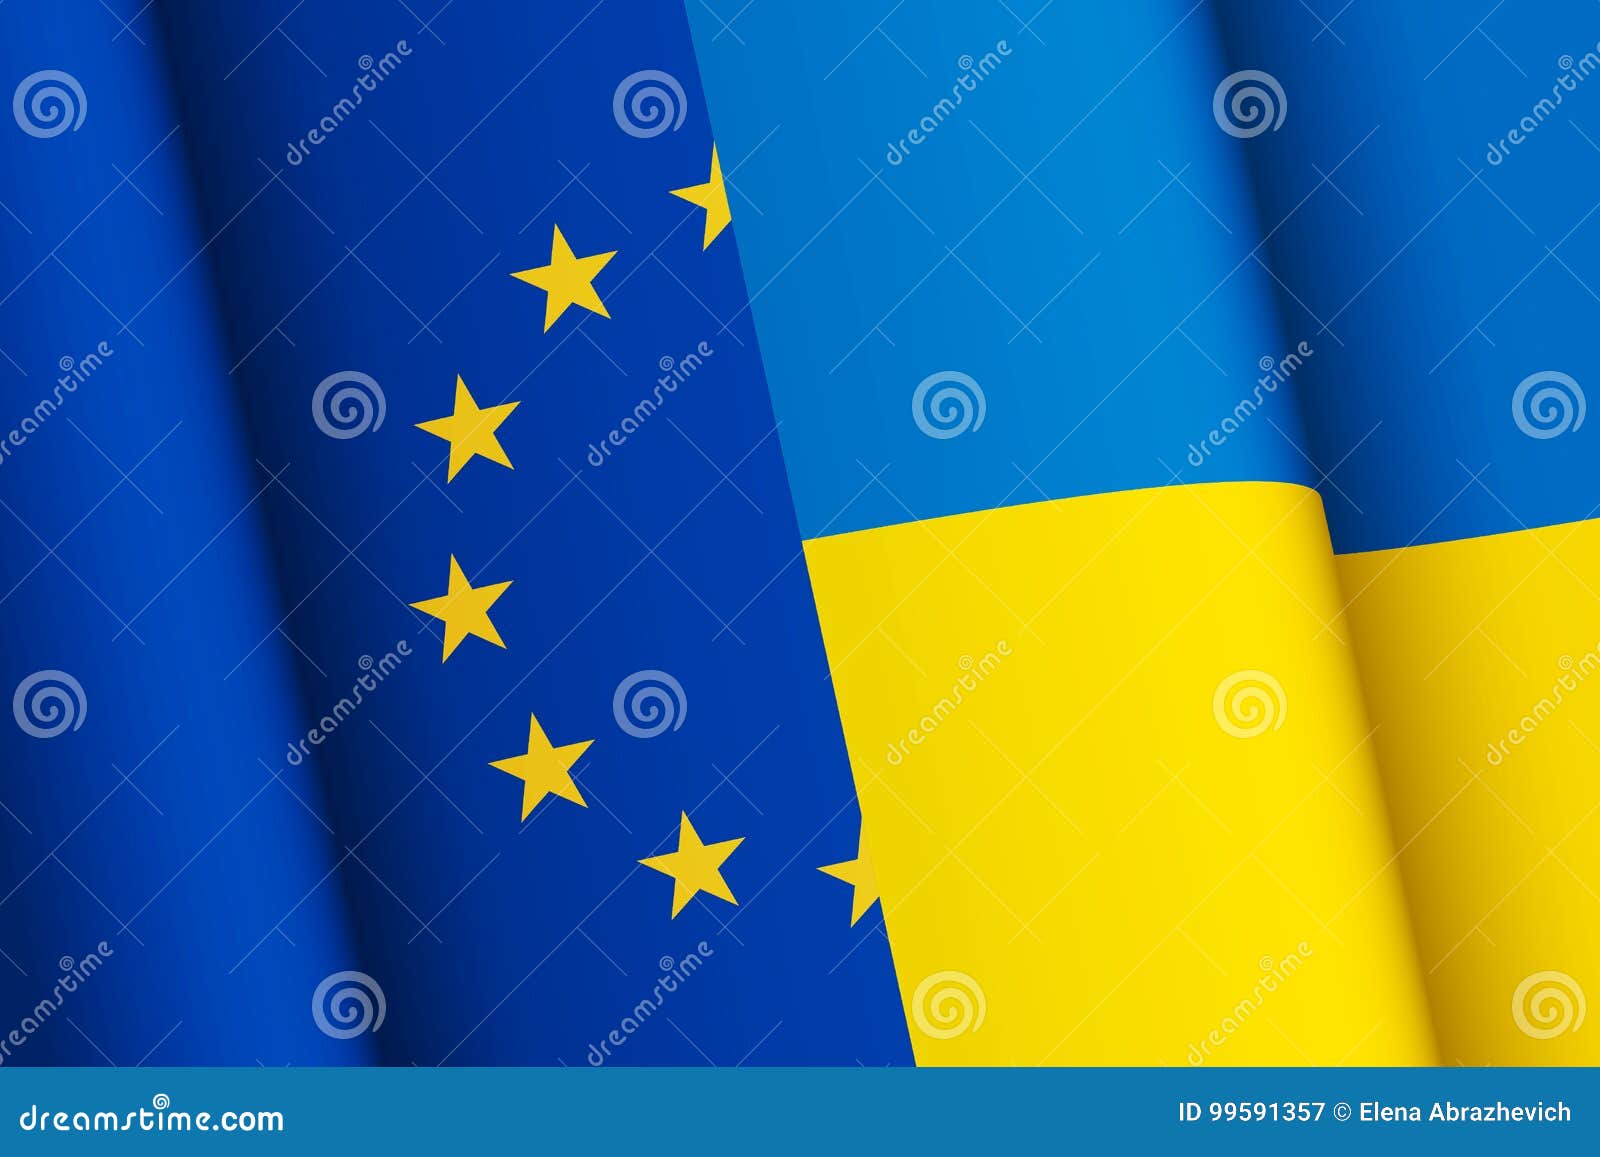 Combined Flags of the European Union and Ukraine Stock Illustration ...